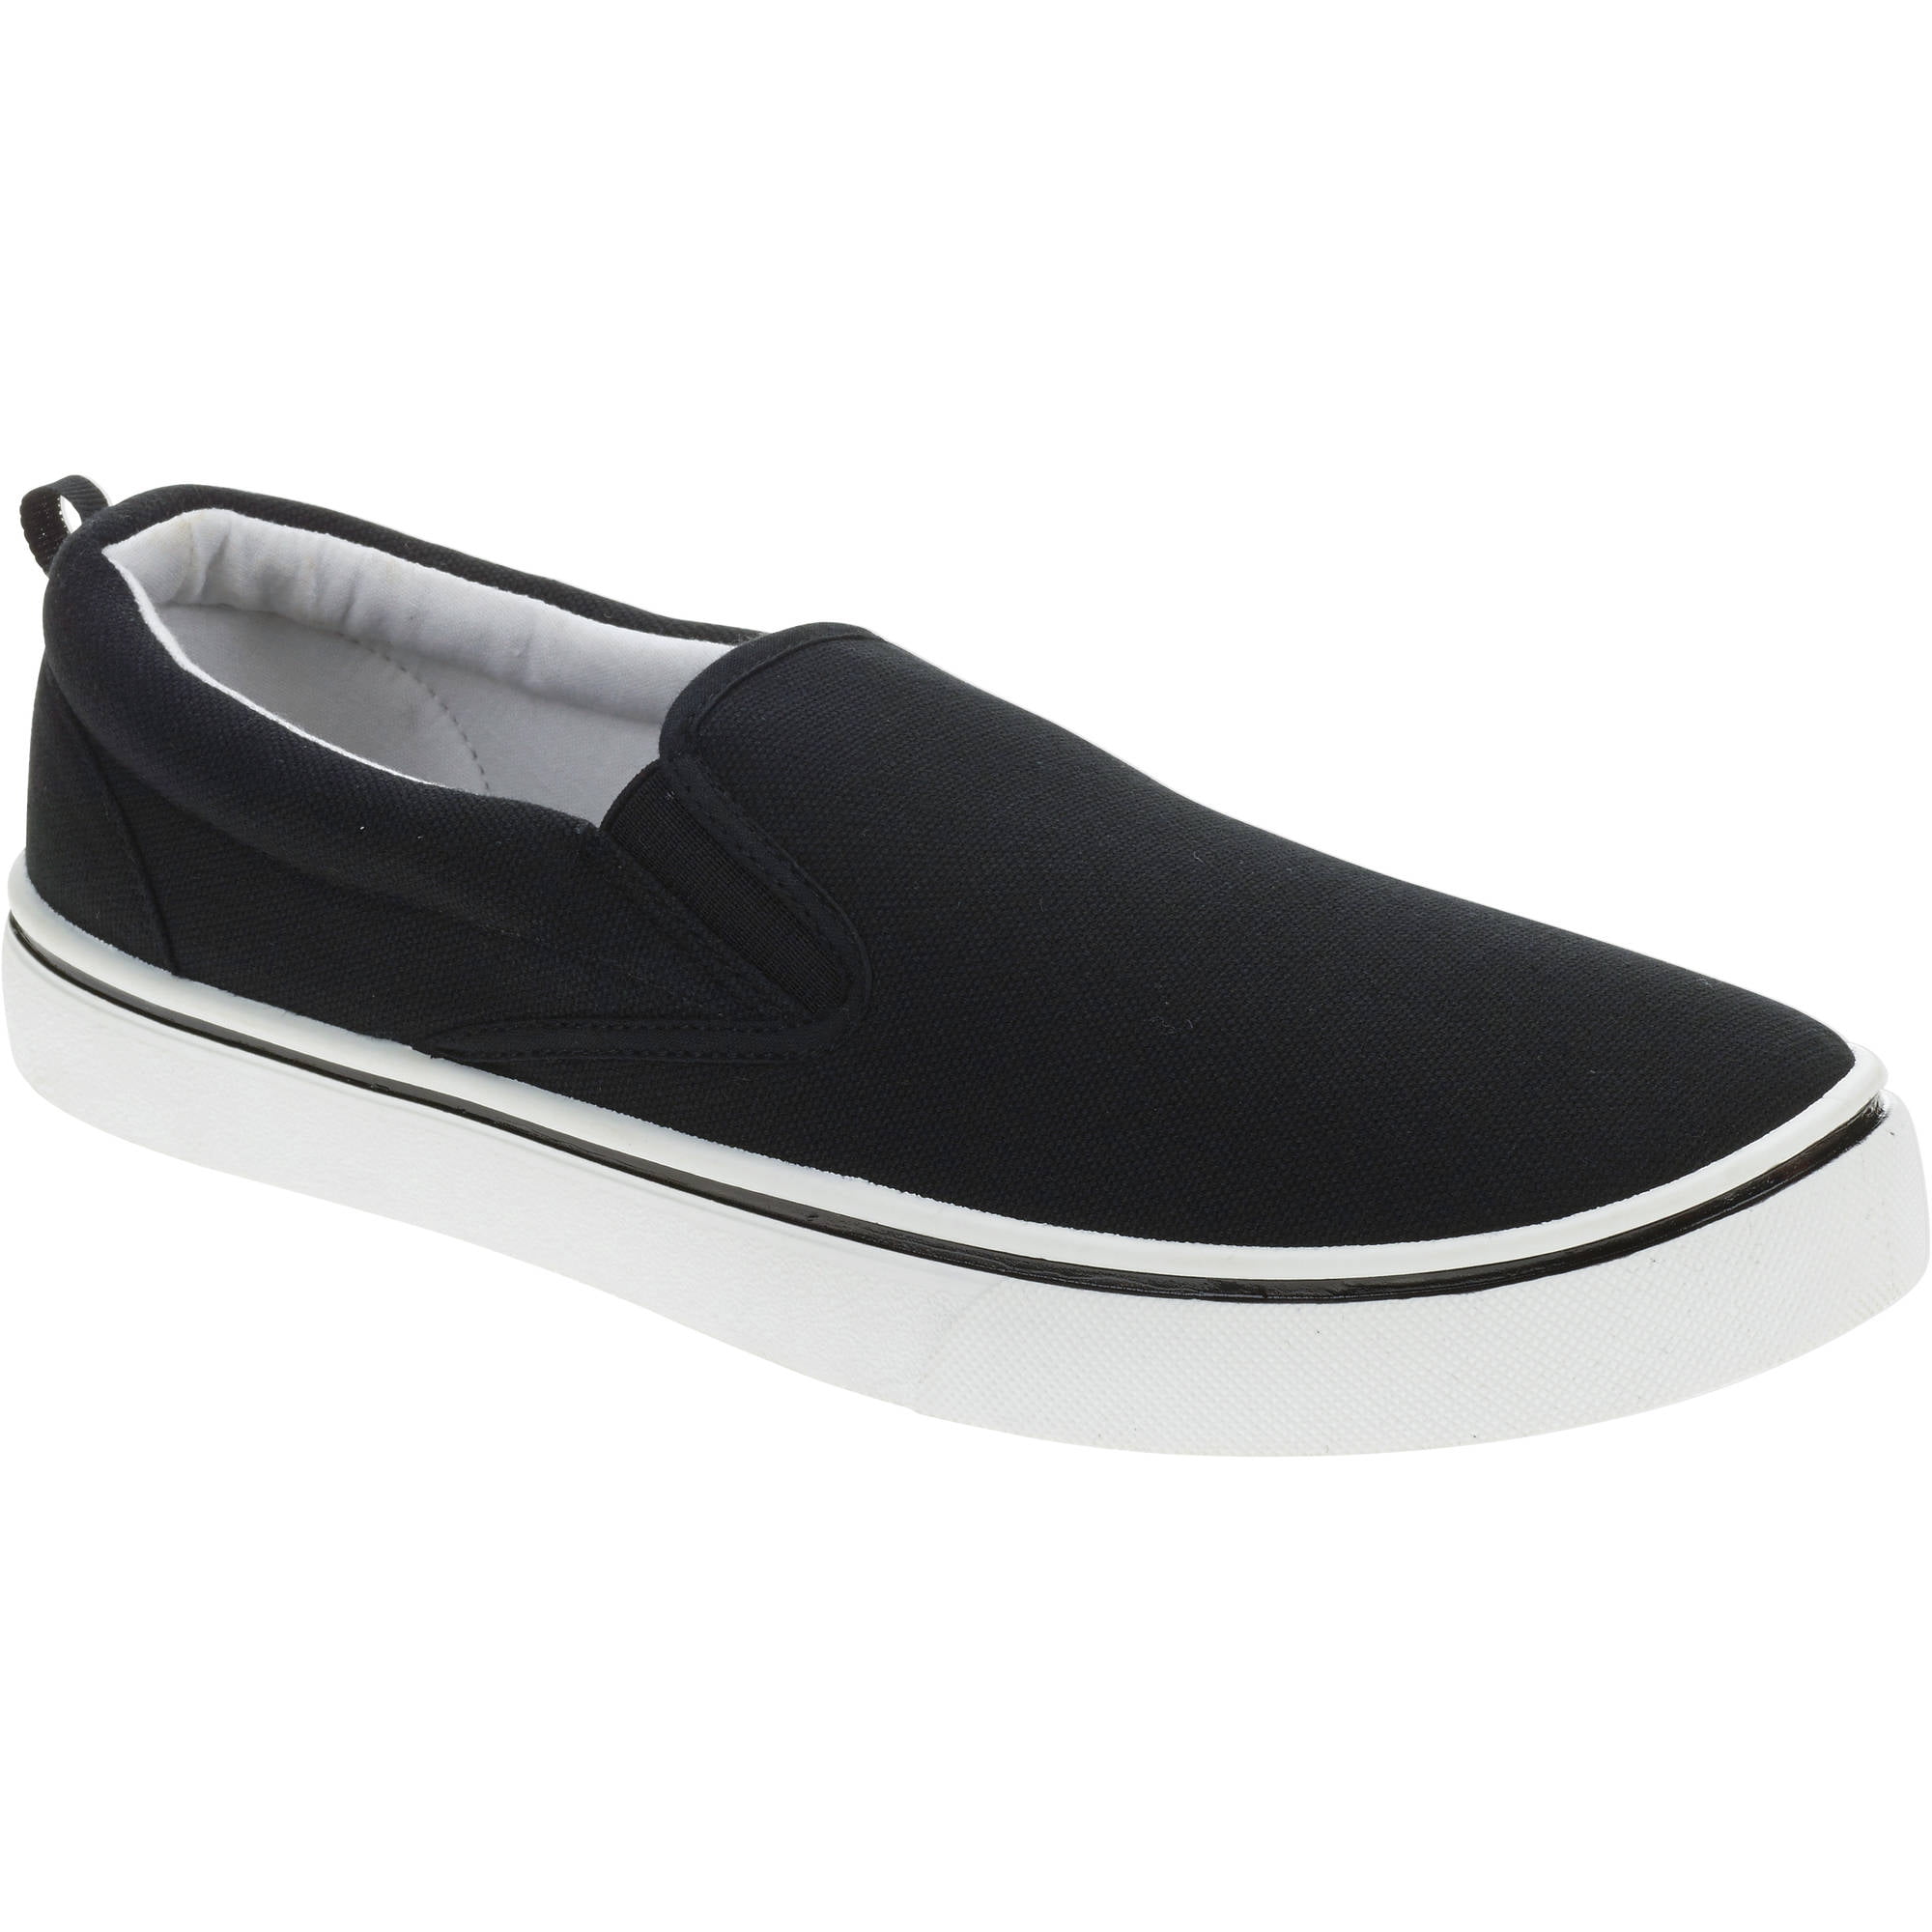 Mens A2108 black canvas lace up shoes by unbranded  SALE  price £5.99 